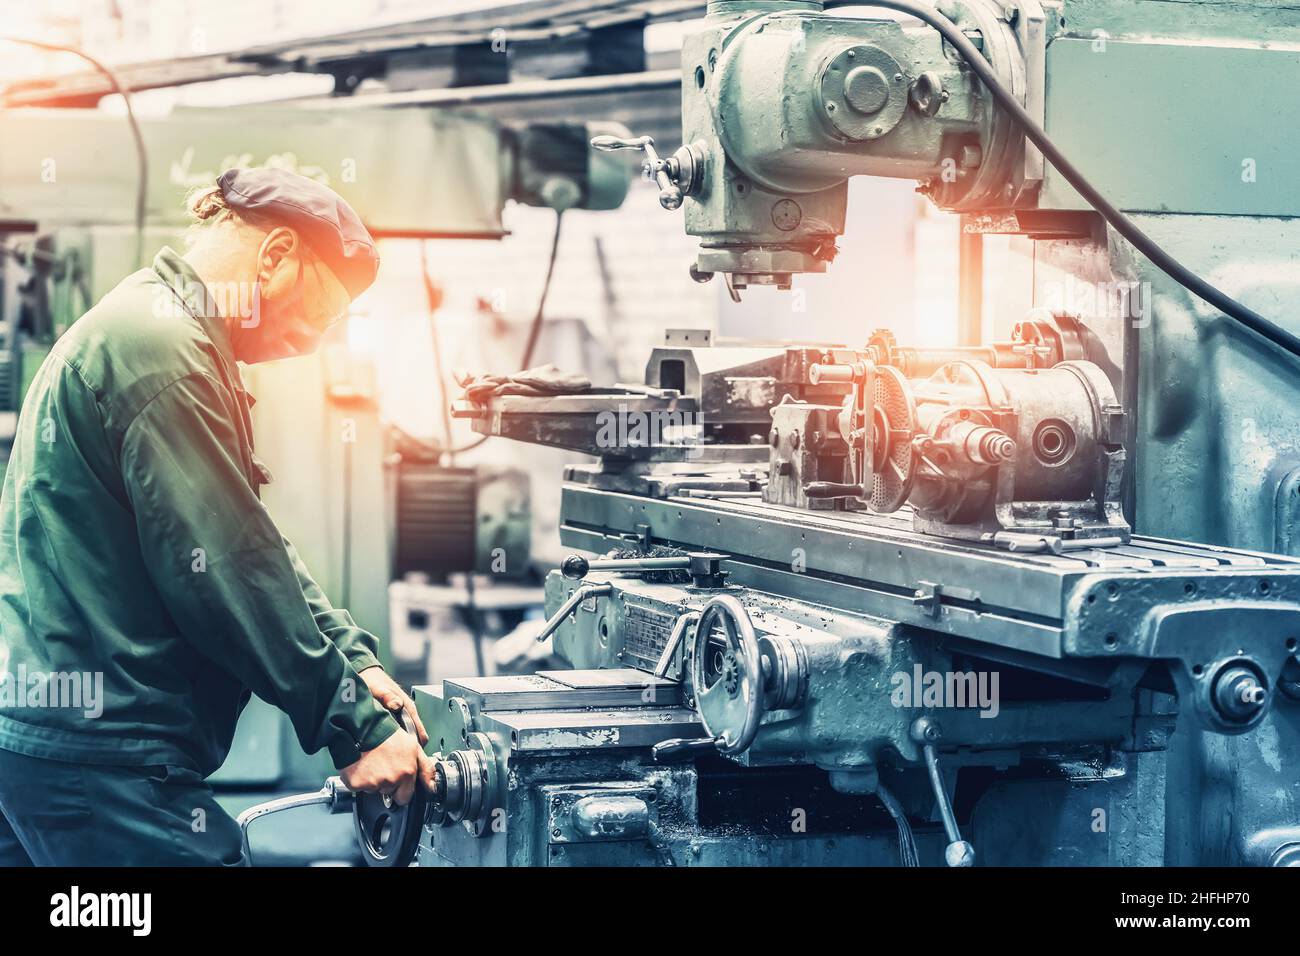 Factory worker using grinder machine tool in metal work factory workshop. Heavy industry manufacturing concept. Stock Photo